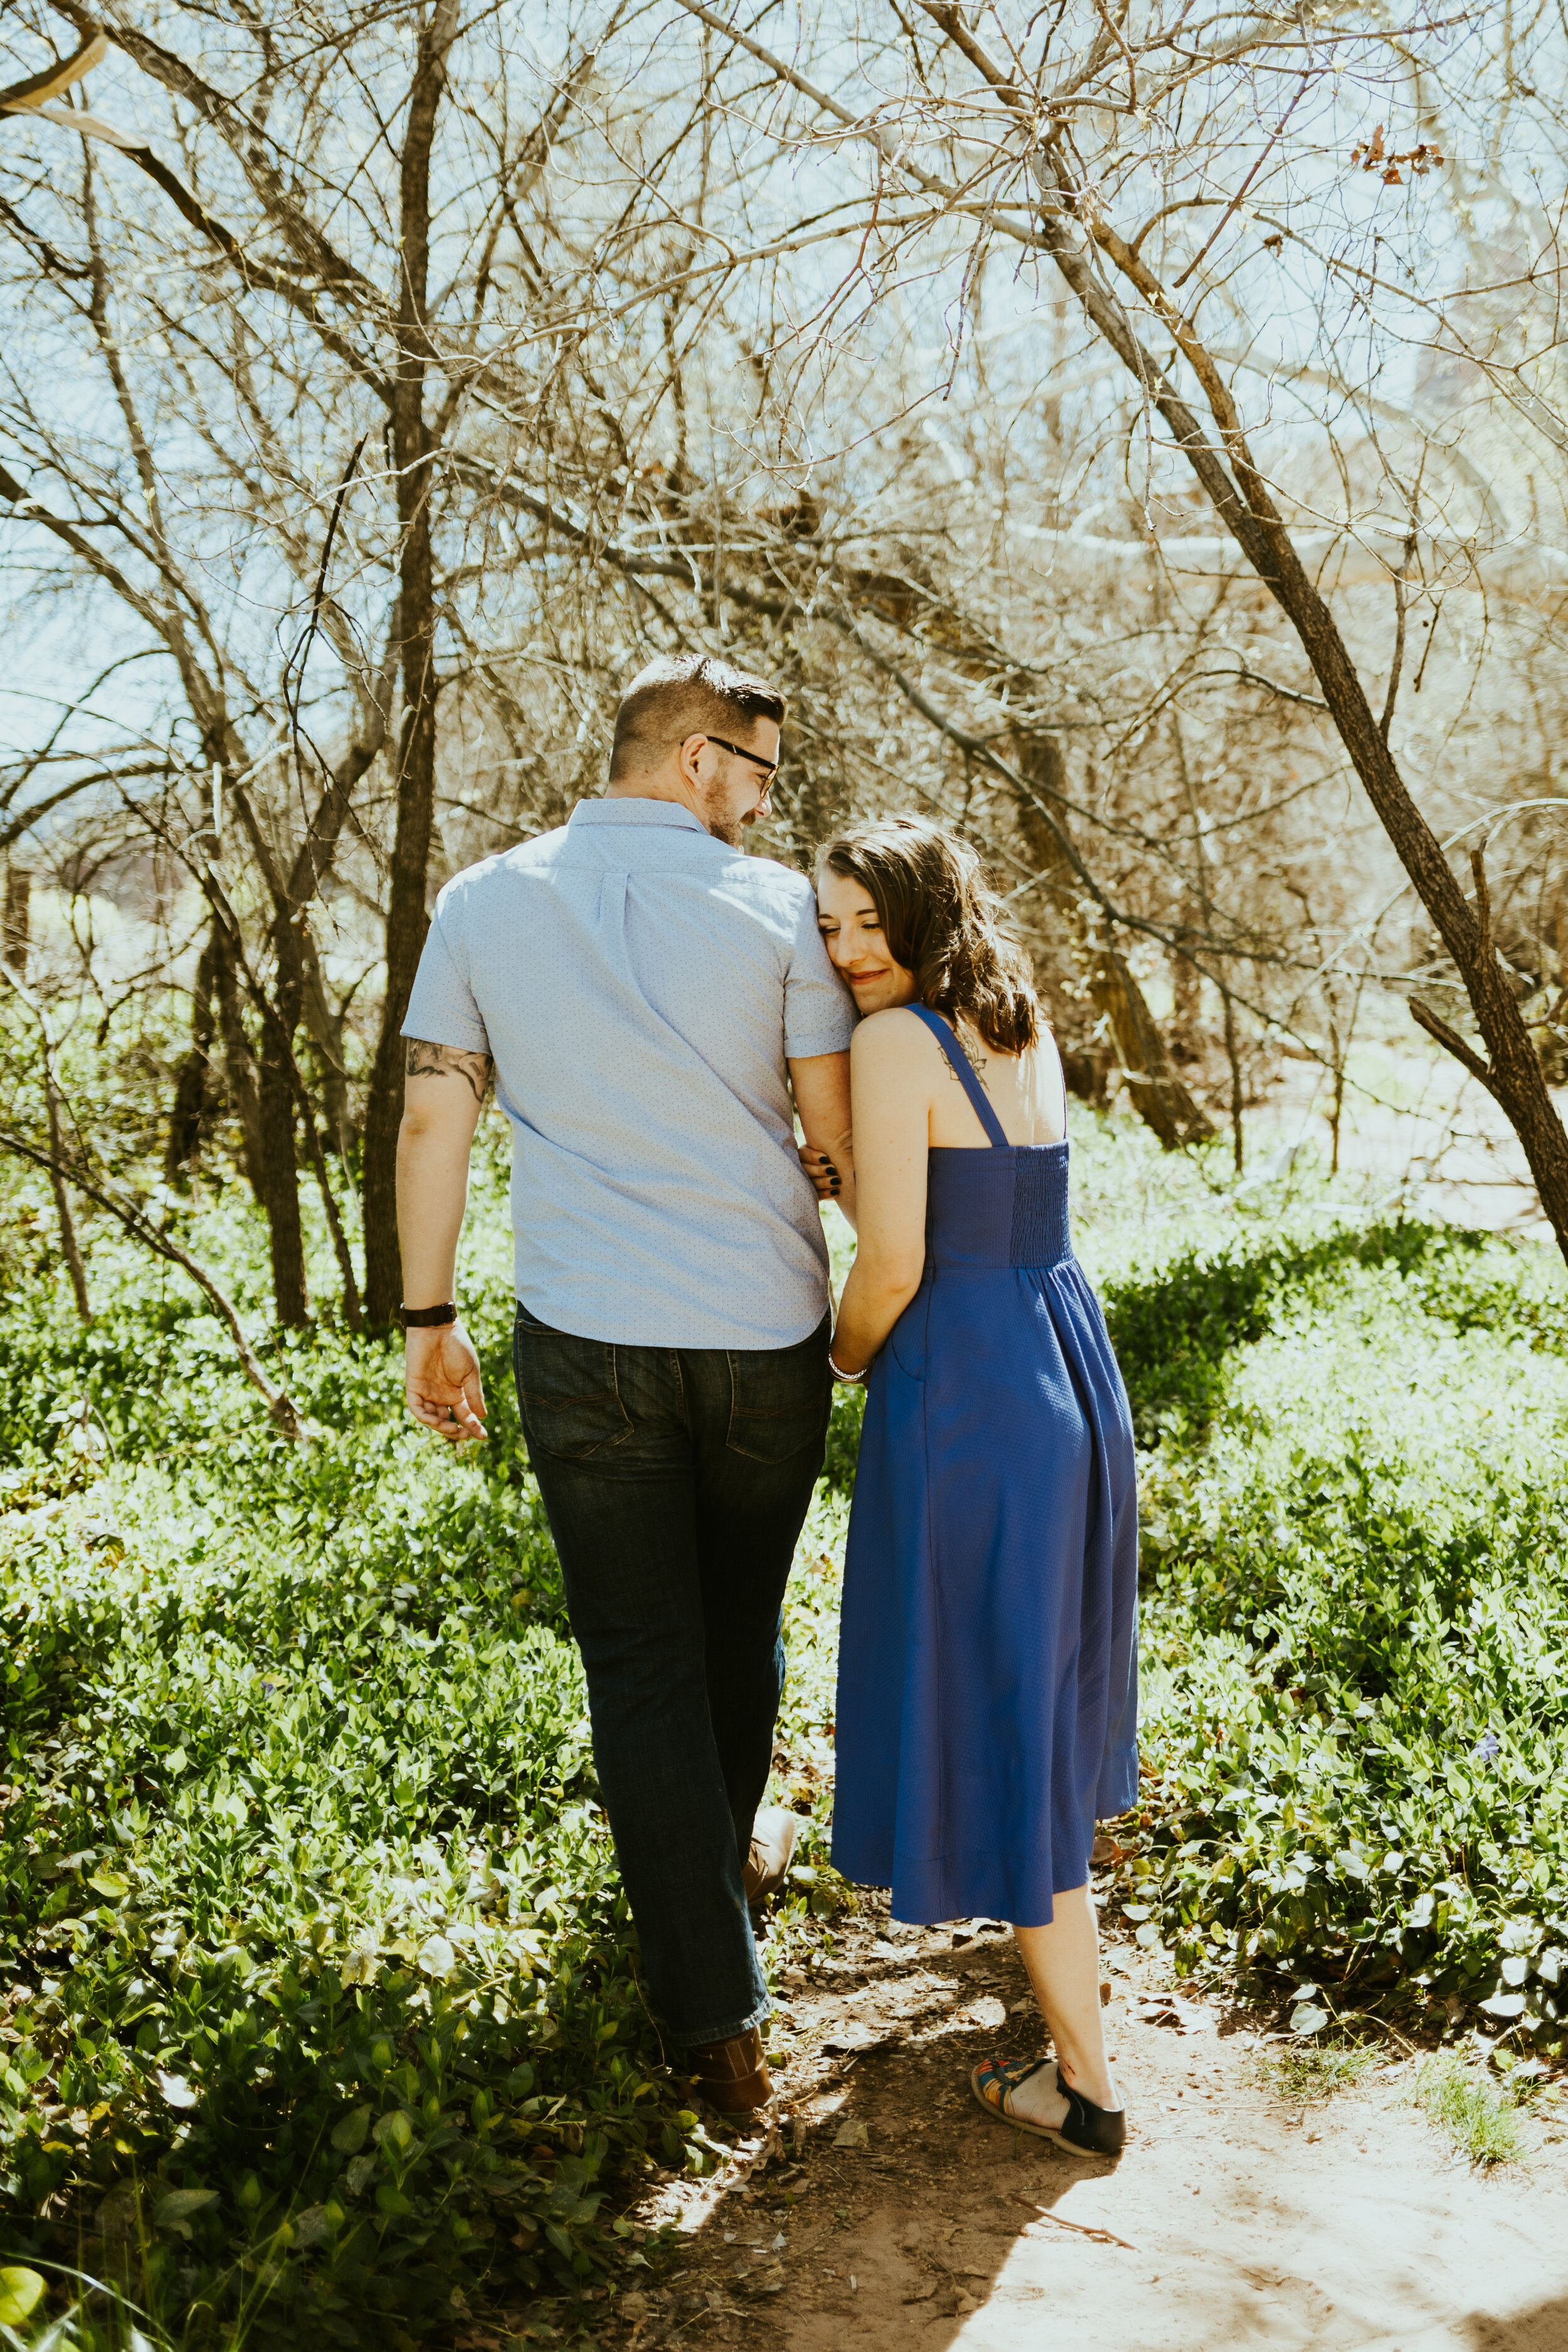 red rock crossing sedona arizona cathedral rock crescent moon ranch couple photos engagement photo outfit inspiration couple posing ideas midday photos-7.jpg